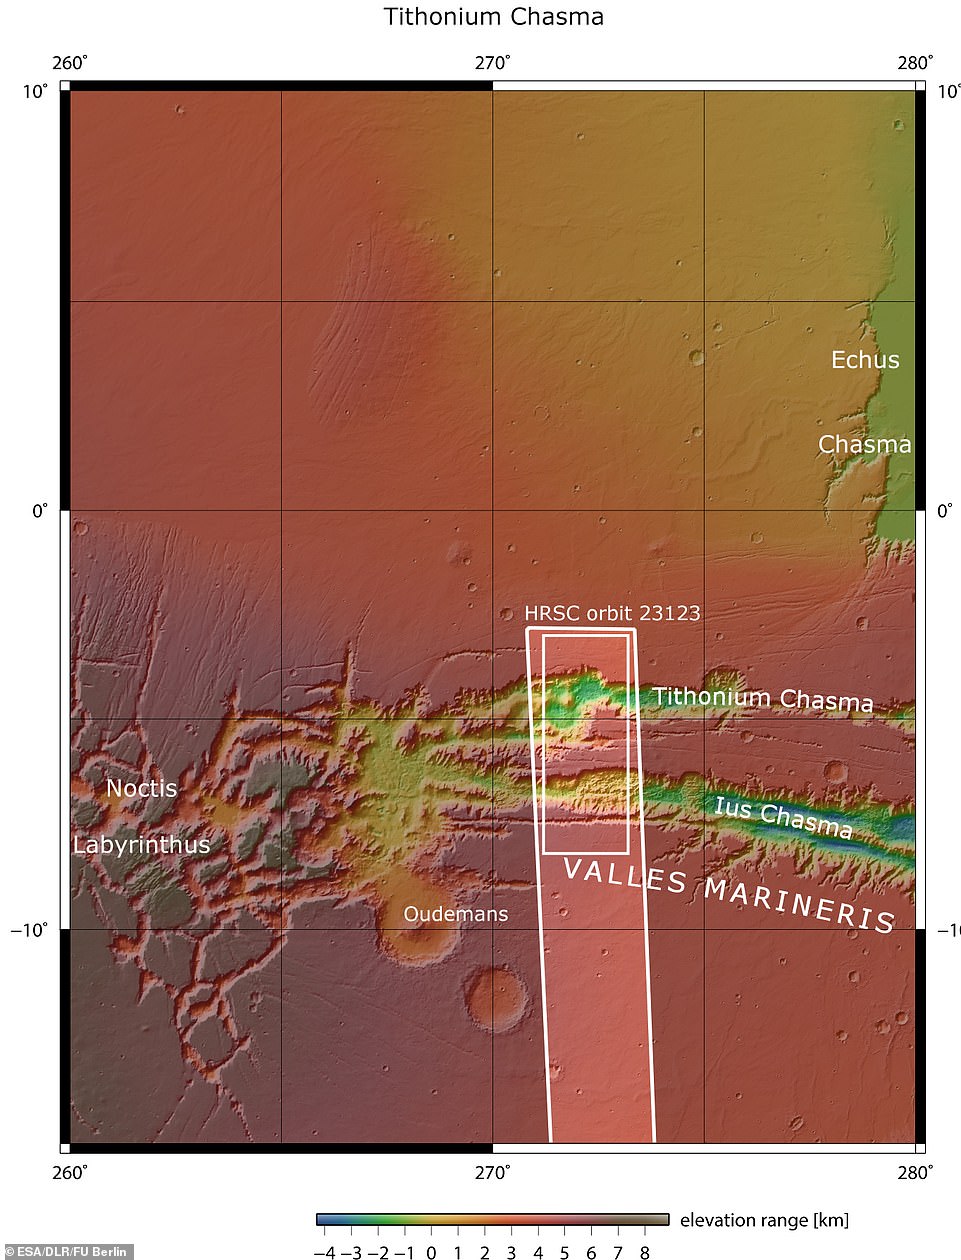 Lus and the Tithonian Chasmata we have seen above.  The area outlined by the white box in bold indicates the area imaged by the Mars Express High Resolution Stereo Camera on April 21, 2022 in orbit.